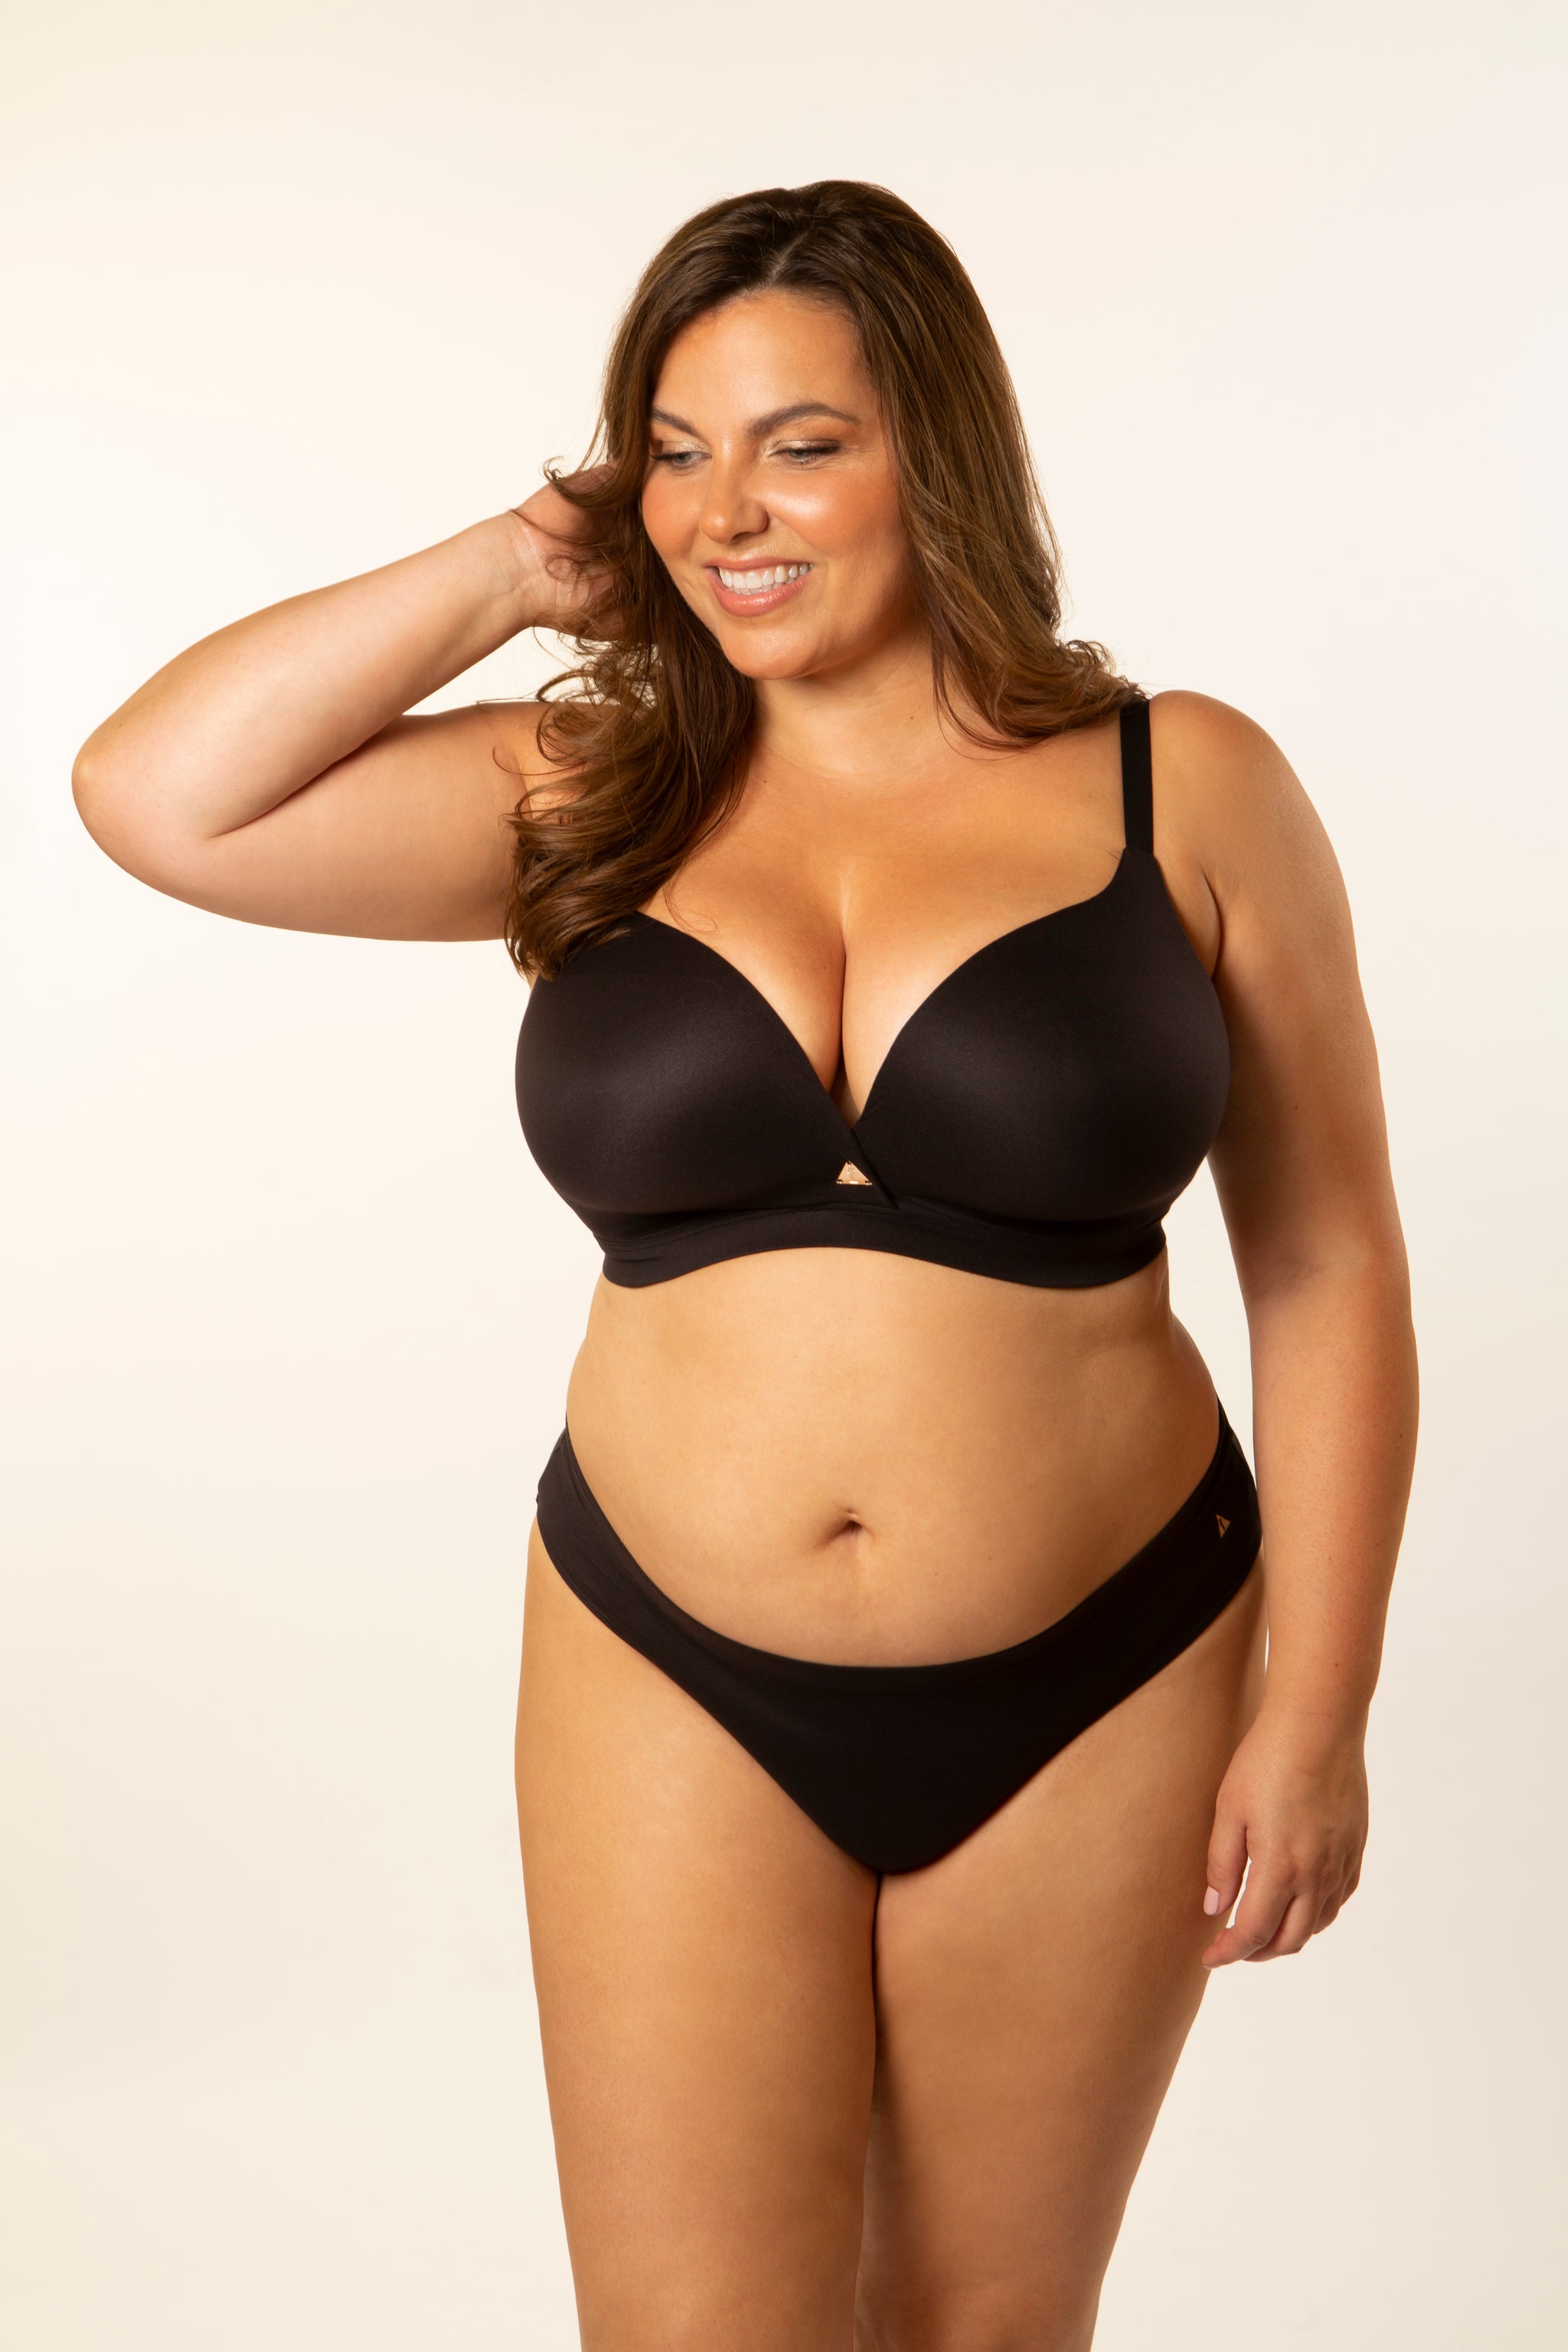 The Freedom Bra™ - Best Non-Wired Bra for Big Busts - Freedom